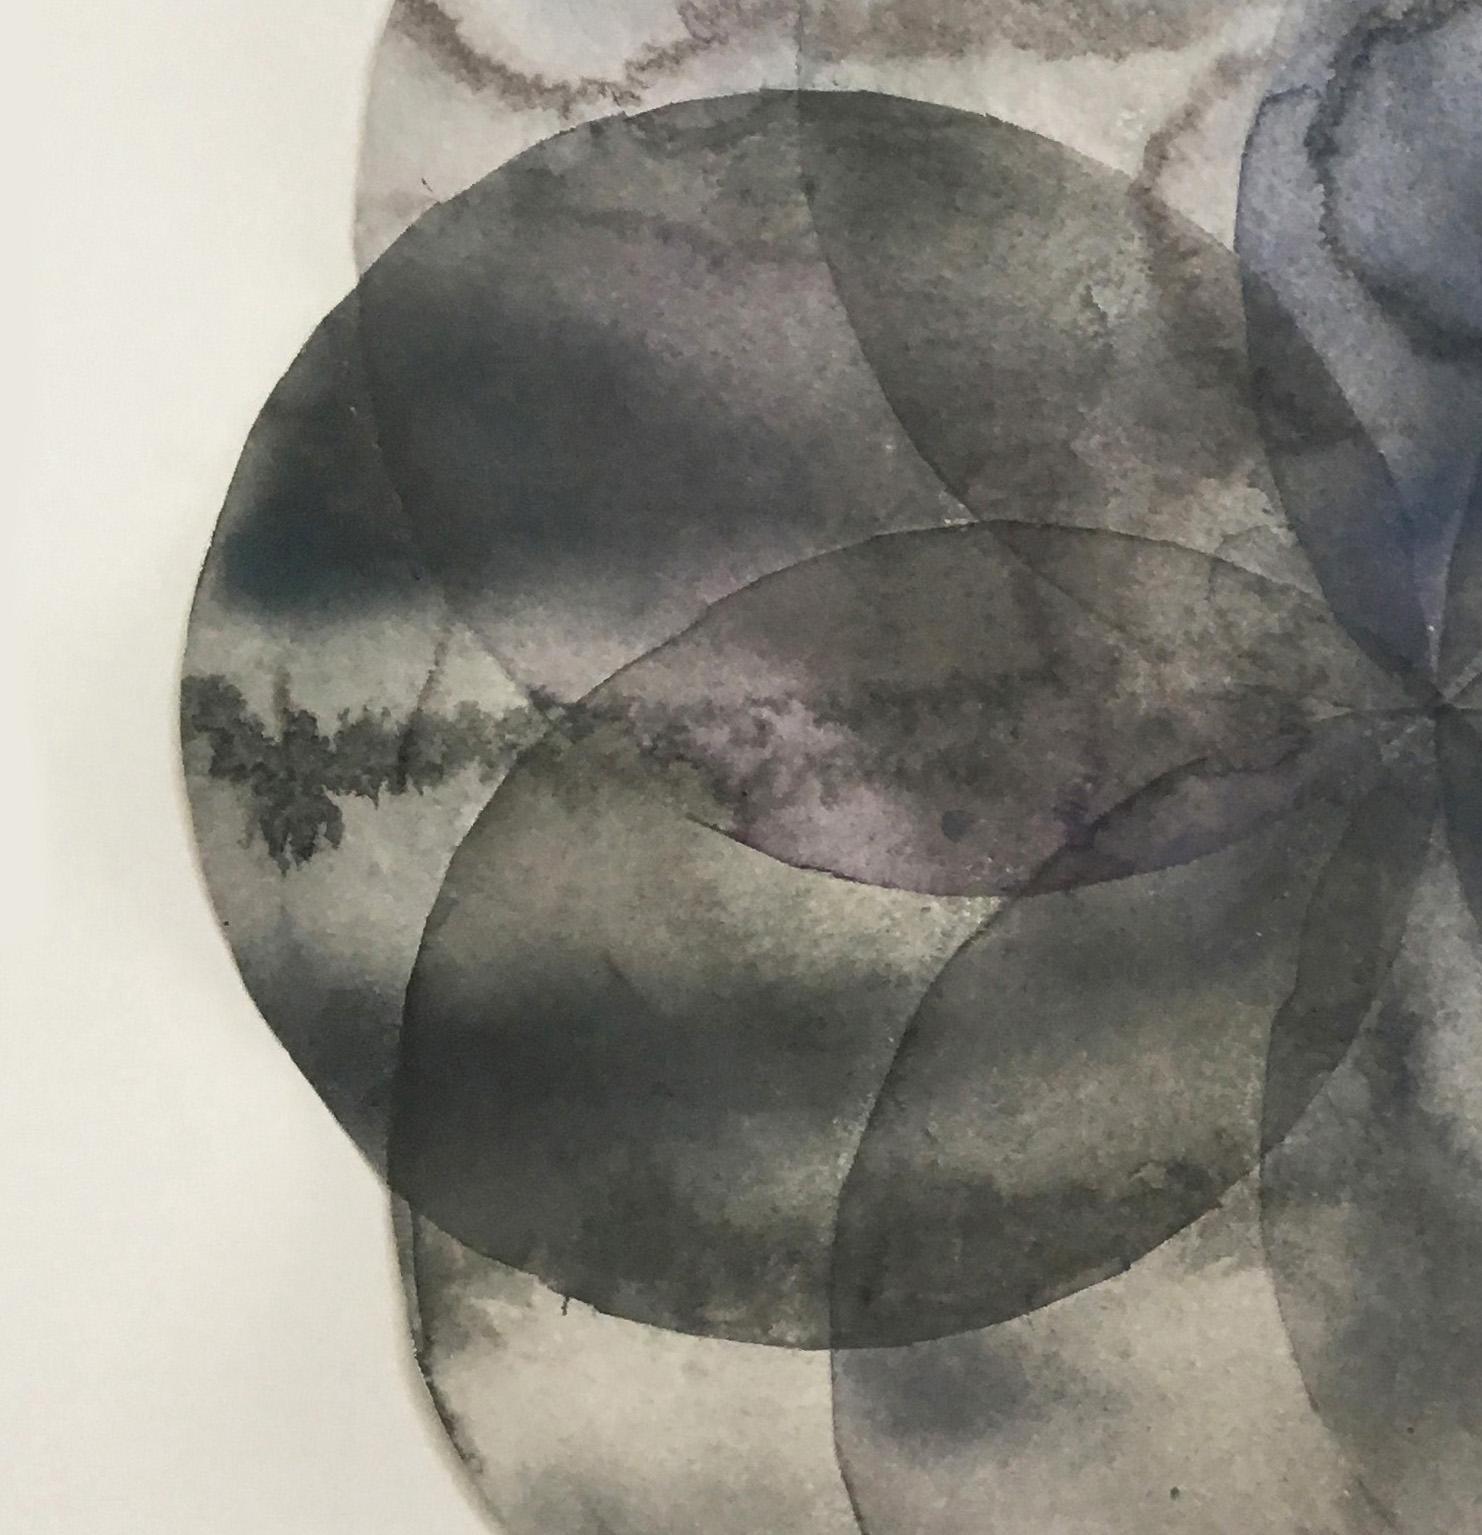 Clare Asch’s “Convergence 10” is part of her series of watercolors consisting of overlapping, transparent circles that explore the interaction of geometry vs. spontaneous paint and gesture. The painting is made up of smoky, silvery greys which